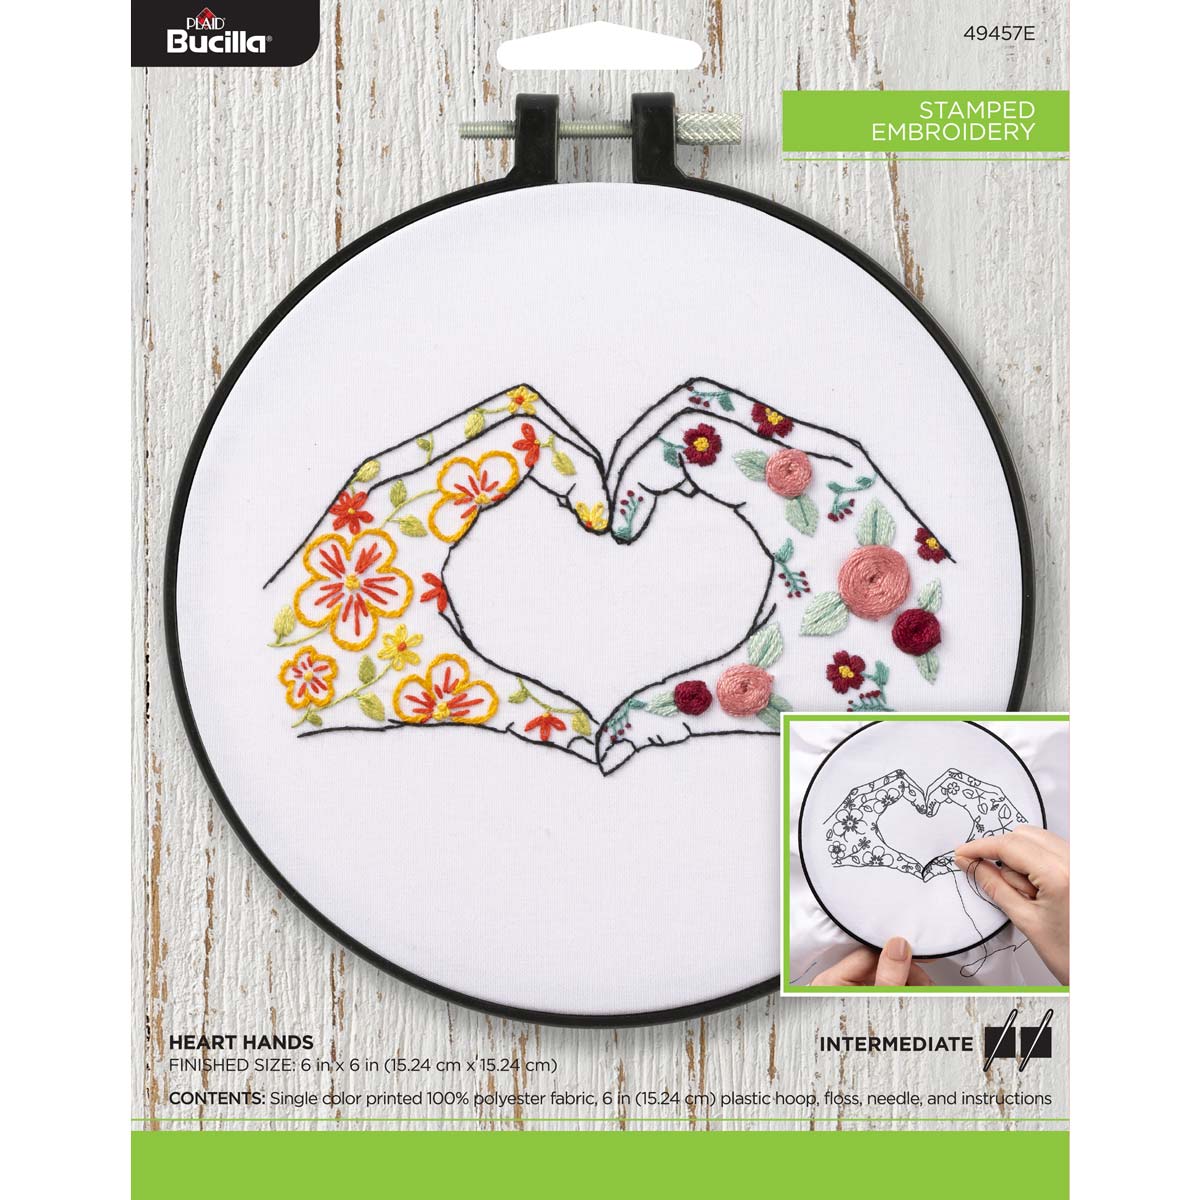 Shop Plaid Bucilla ® Stamped Embroidery - Heart Hands - 49457E